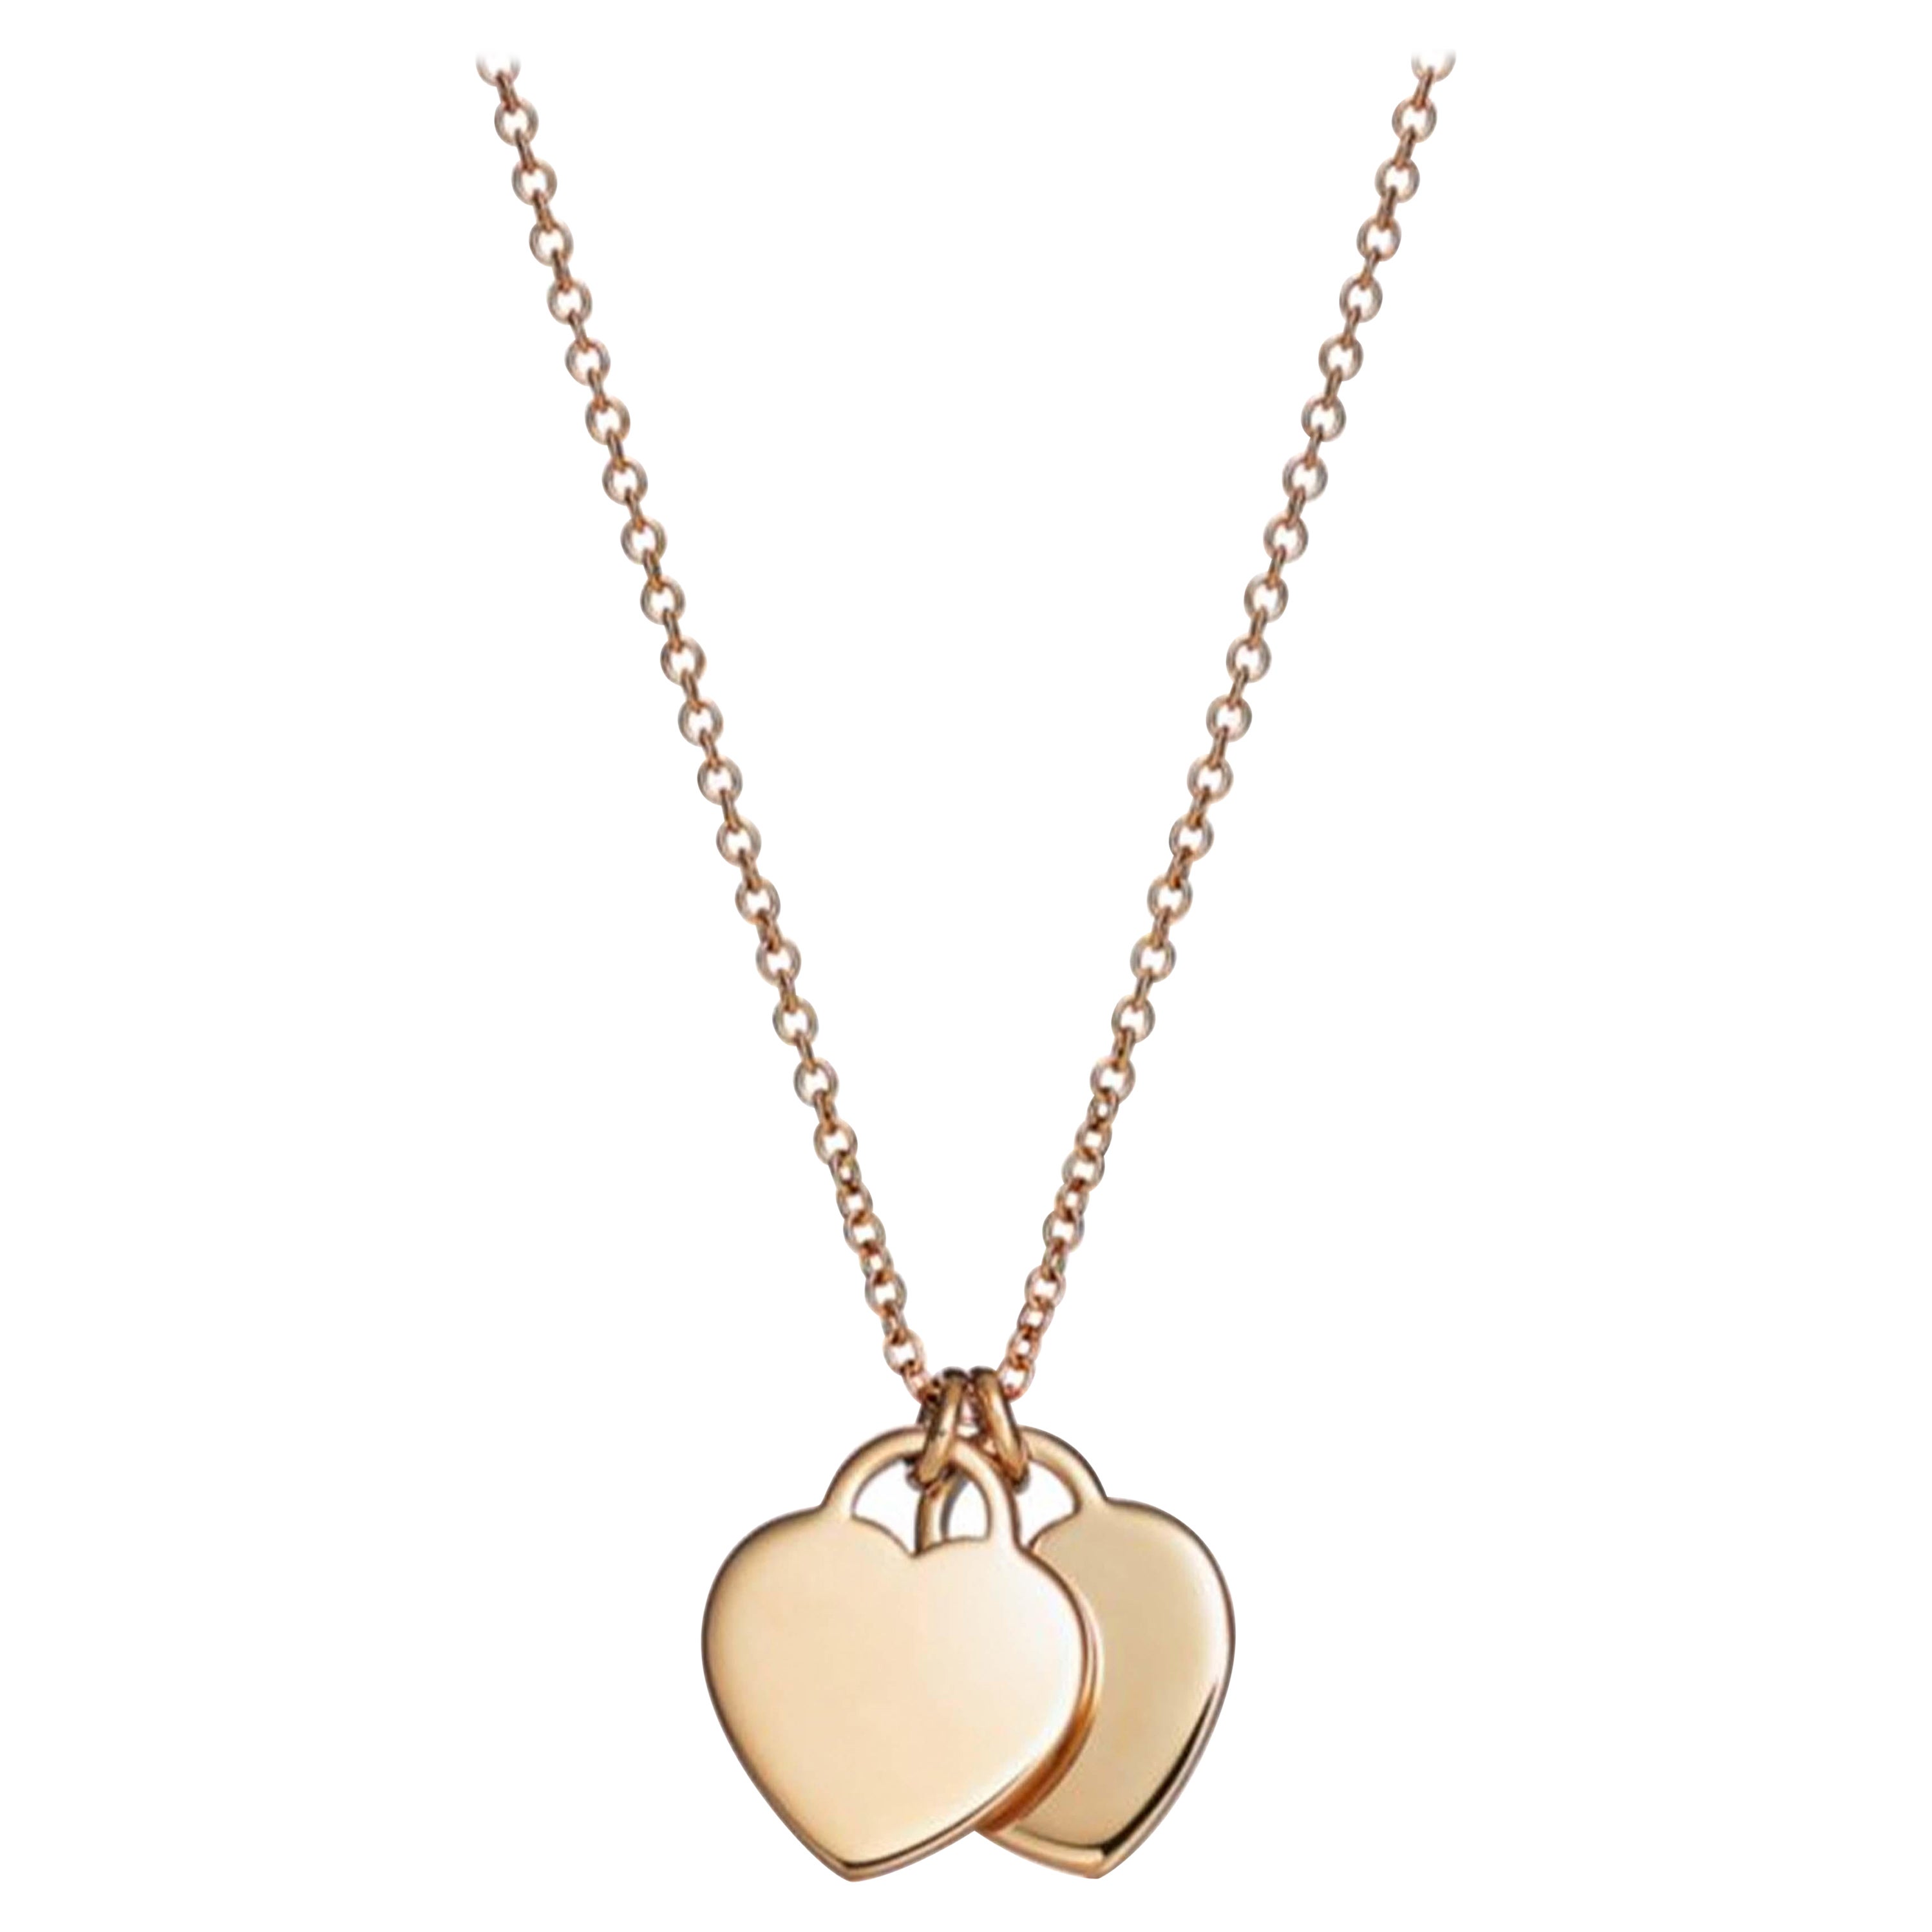 Tiffany & Co. Double Heart Tag Pendant and Chain in 18k Yellow Gold